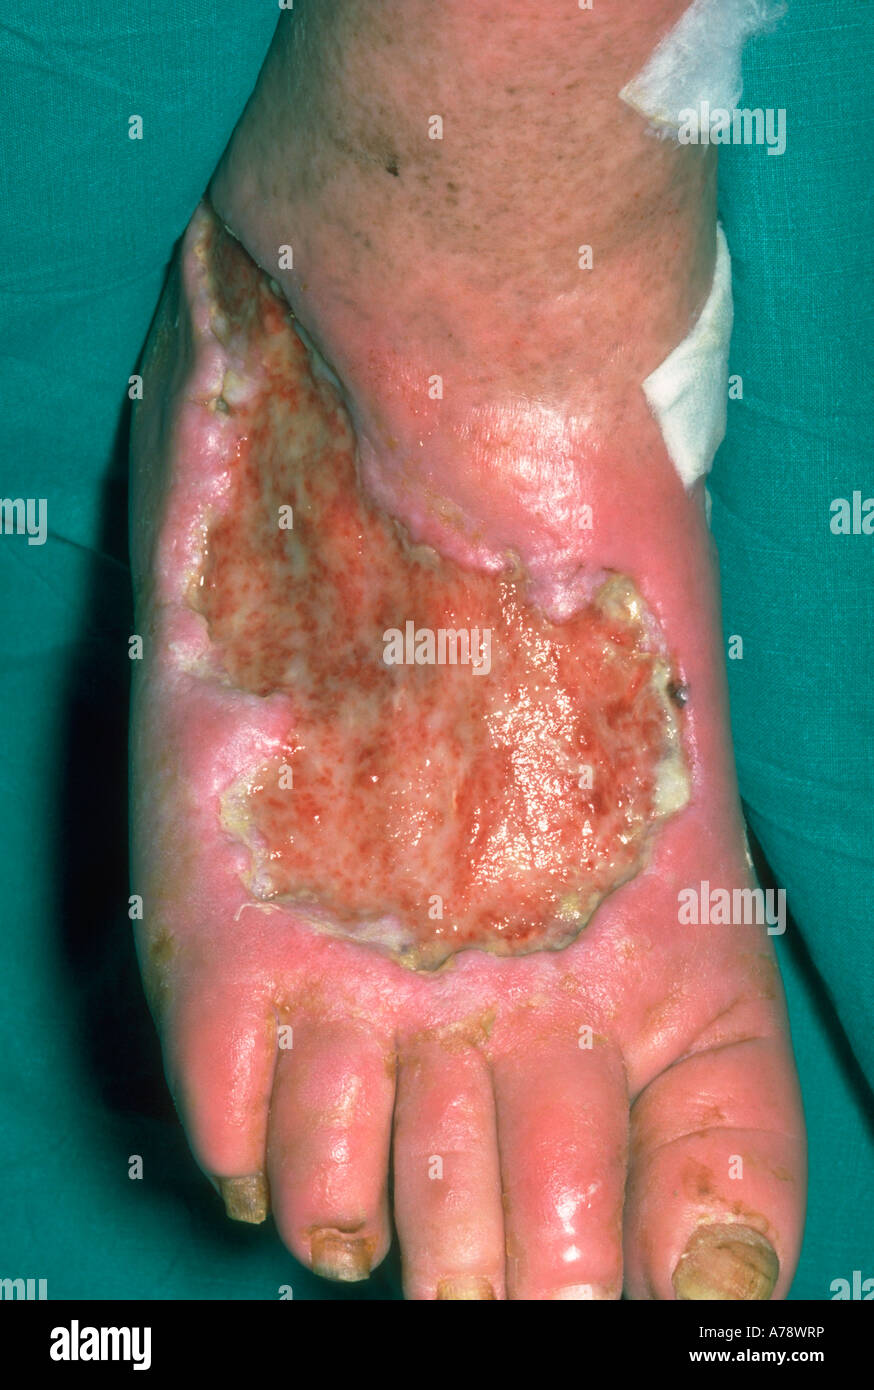 VENOUS ULCER ON FOOT Stock Photo